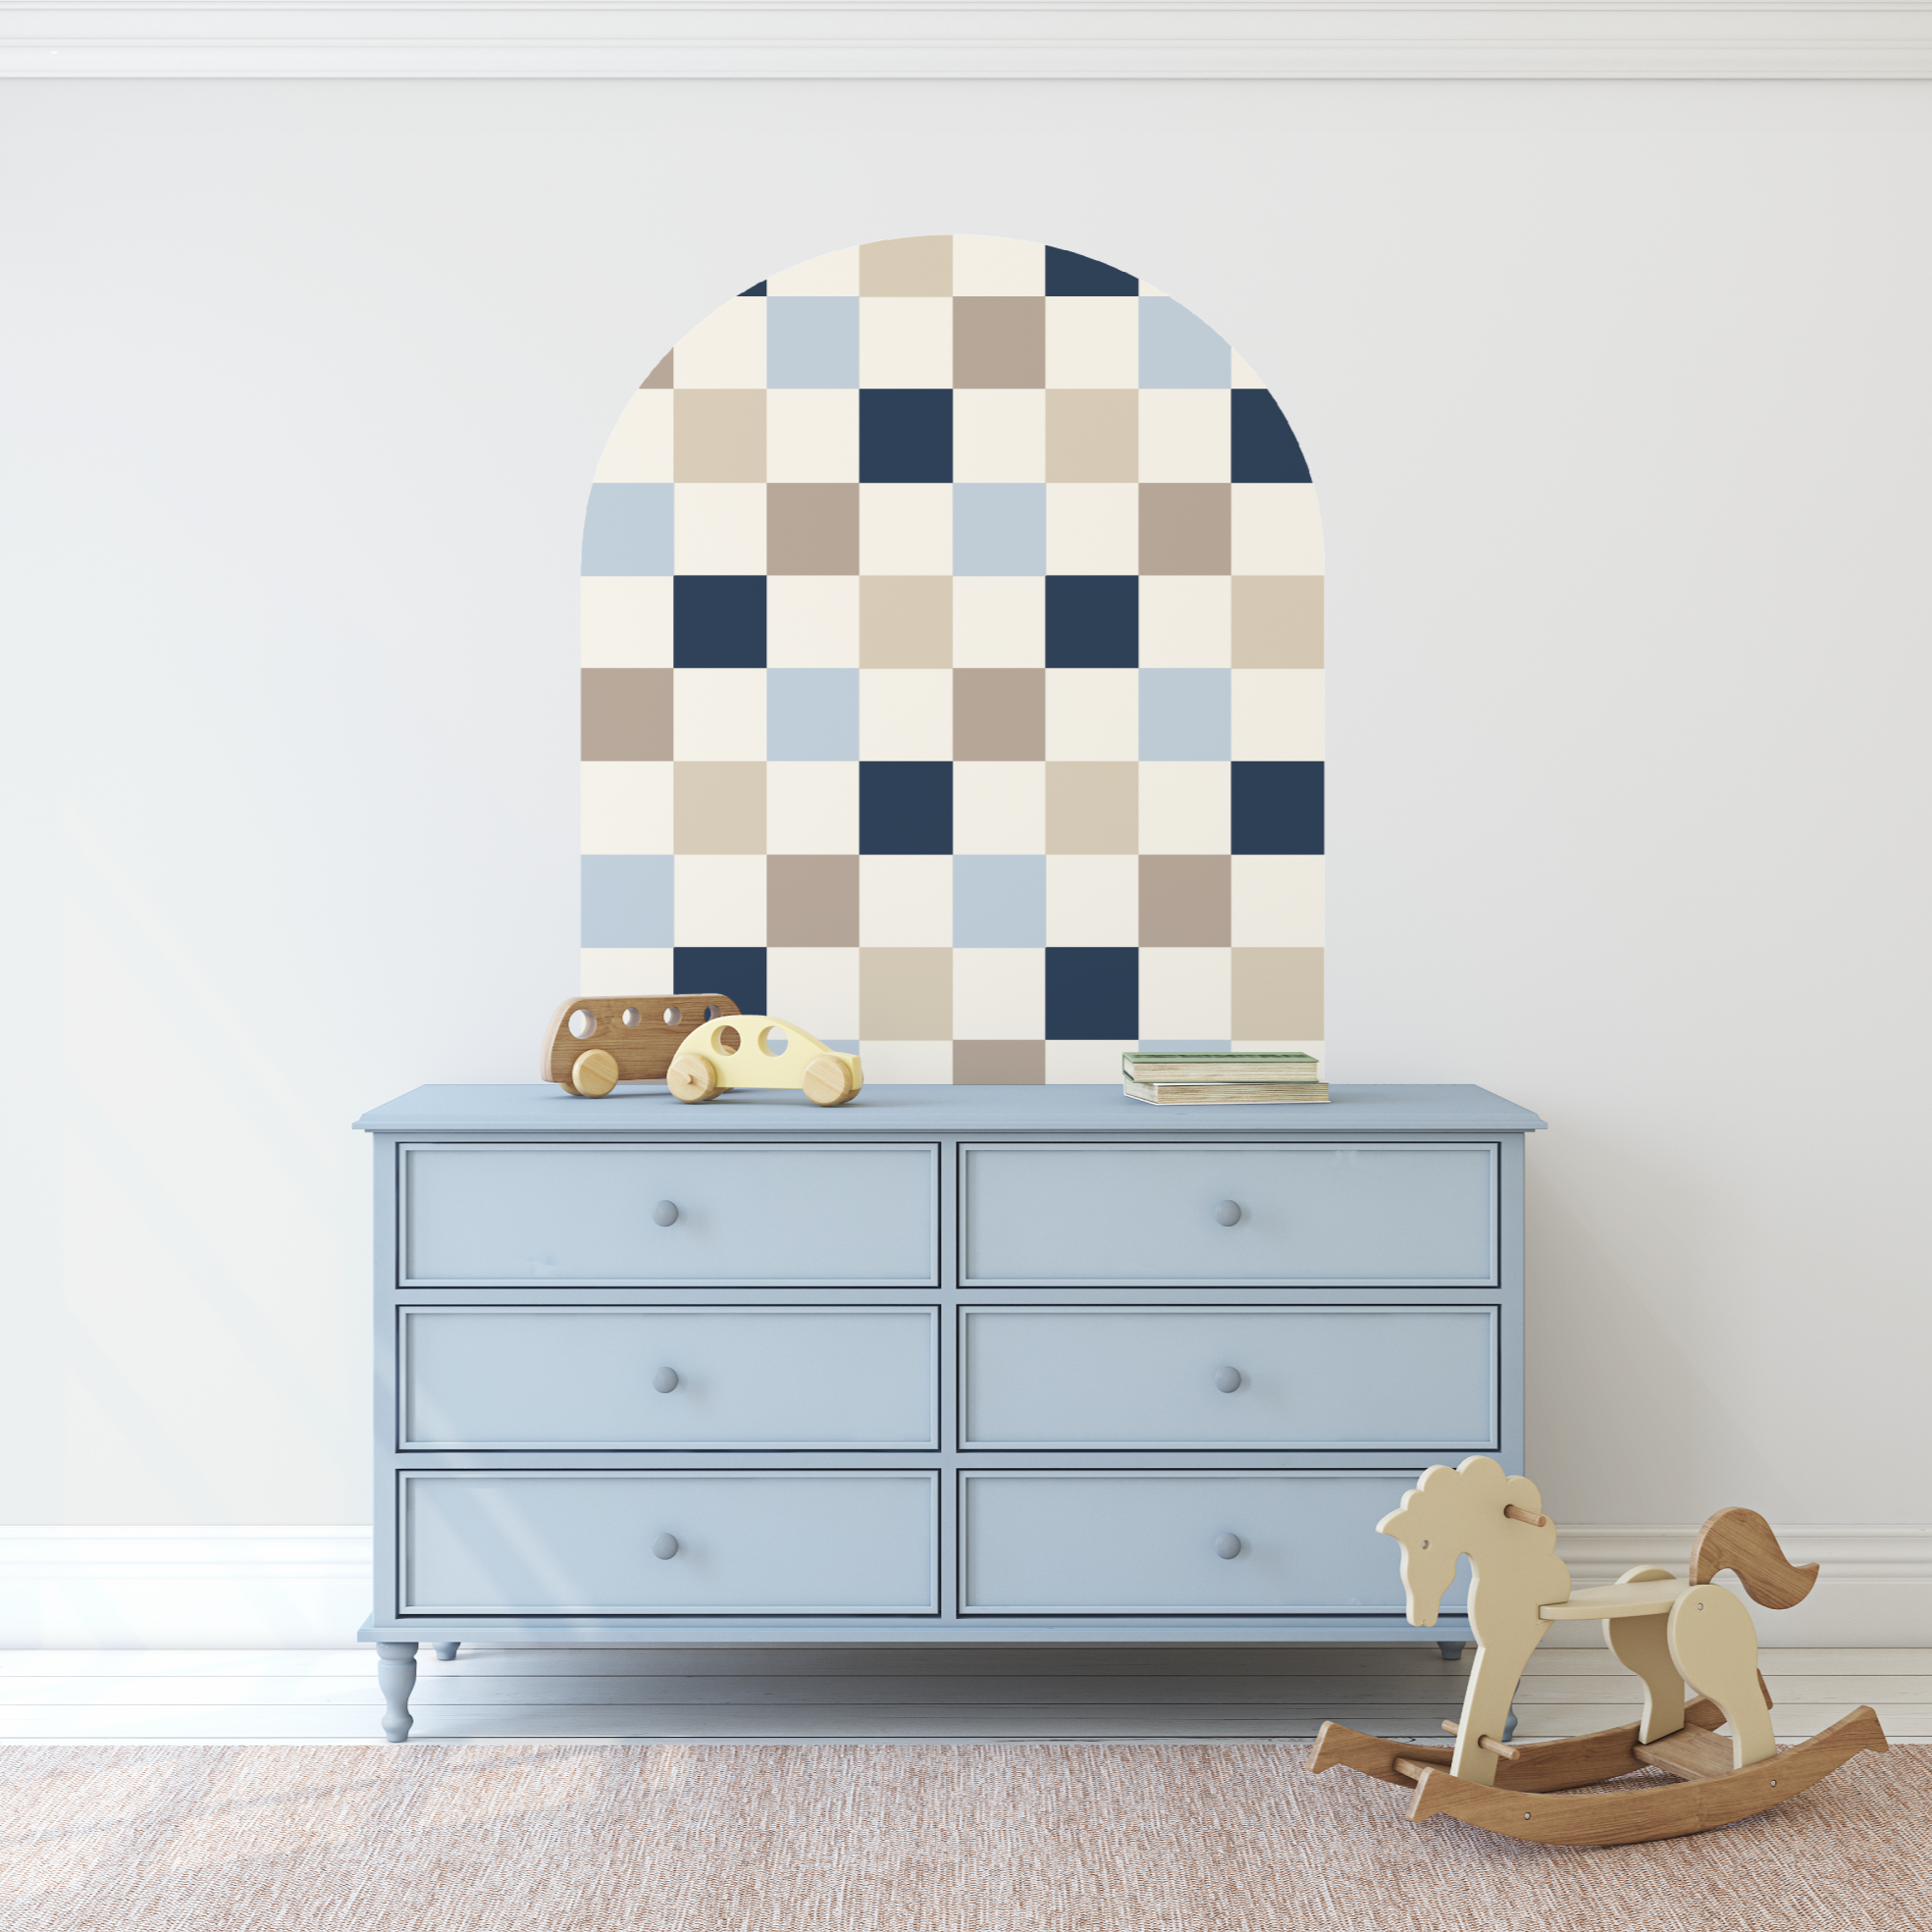 Blue Checkers Arch Decal